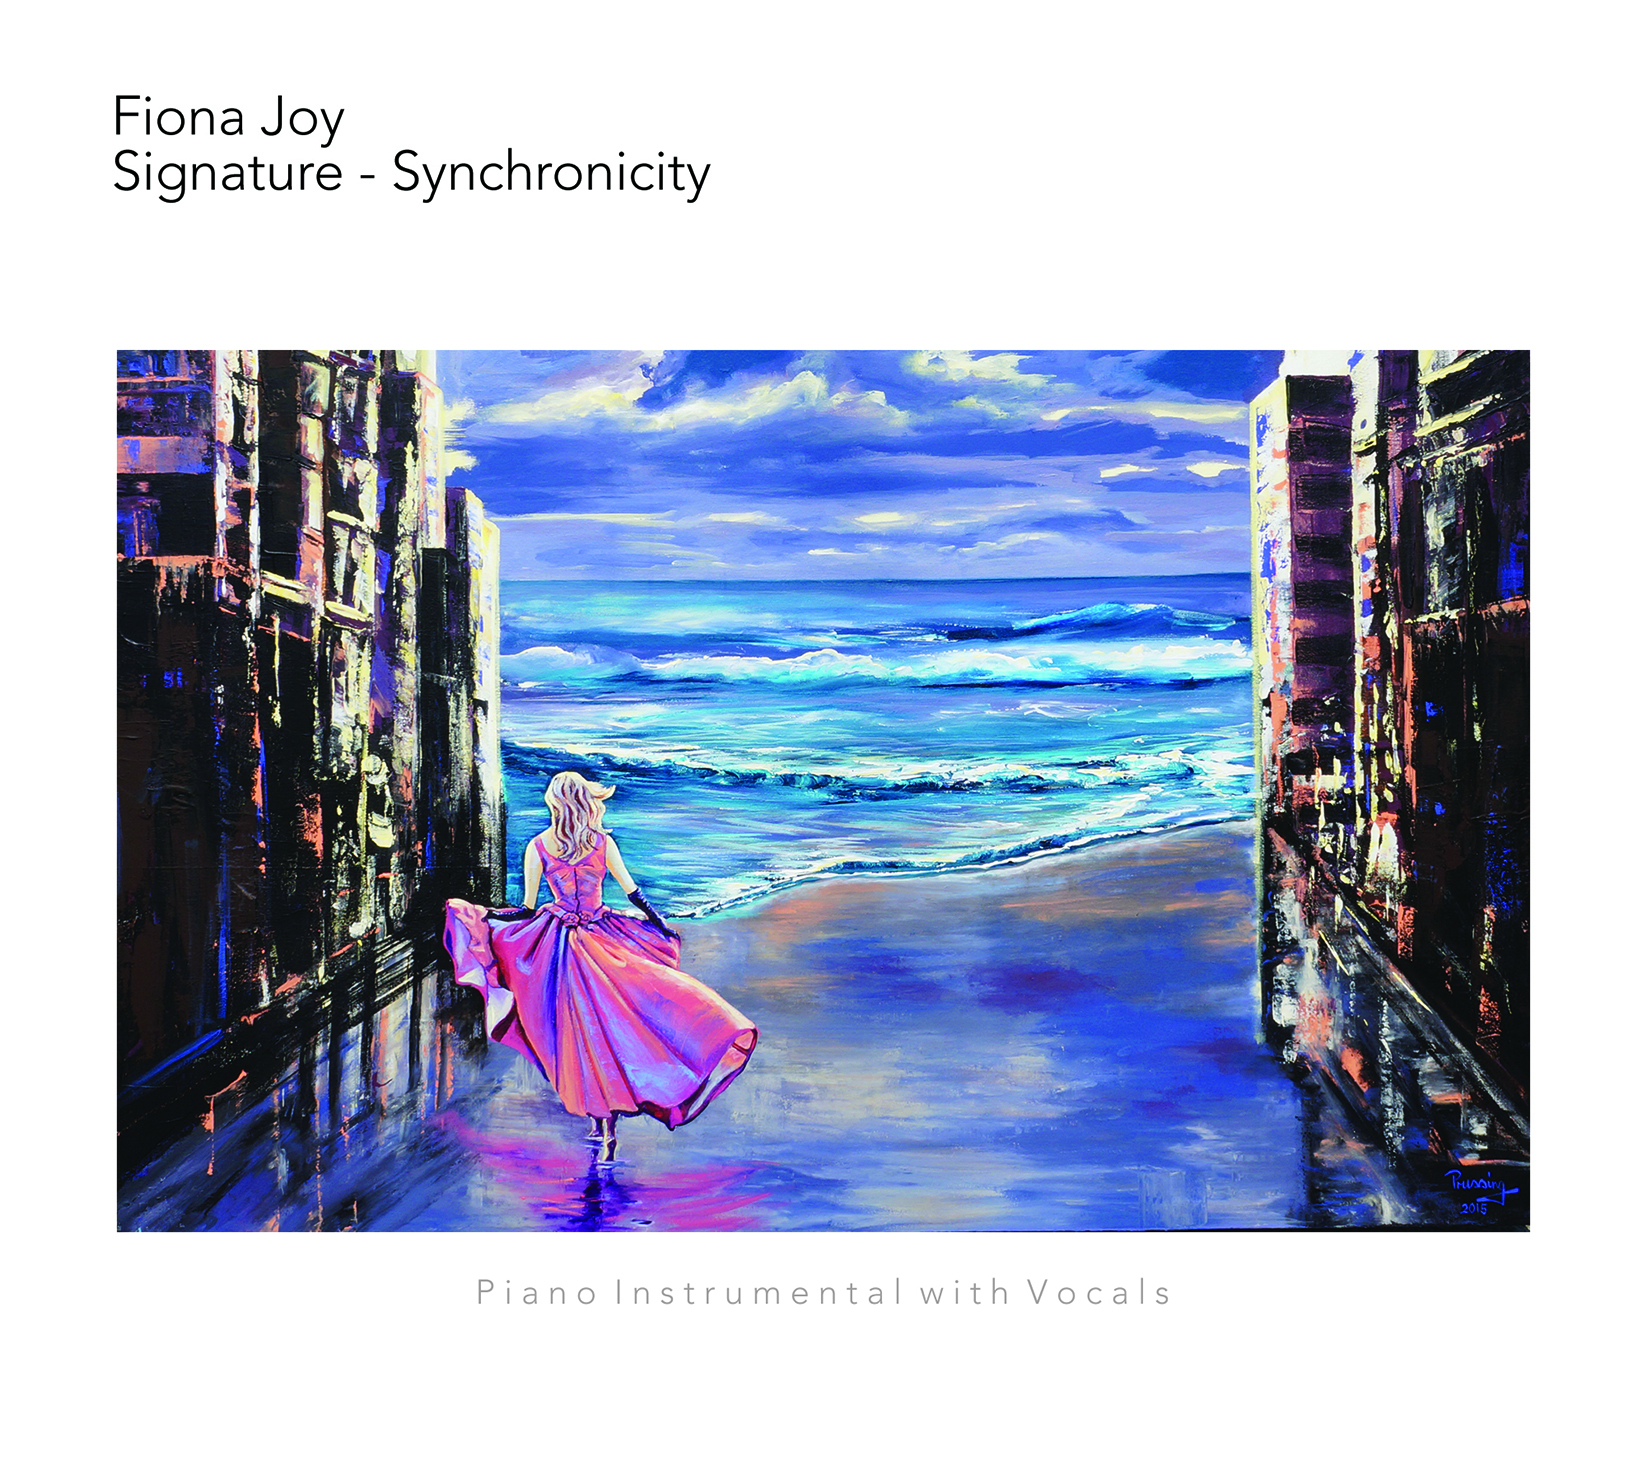 Signature - Synchronicity, by Fiona Joy, is nominated for Best Piano Album - Instrumental, and, Album of the Year in the 2016 ZMR Awards.